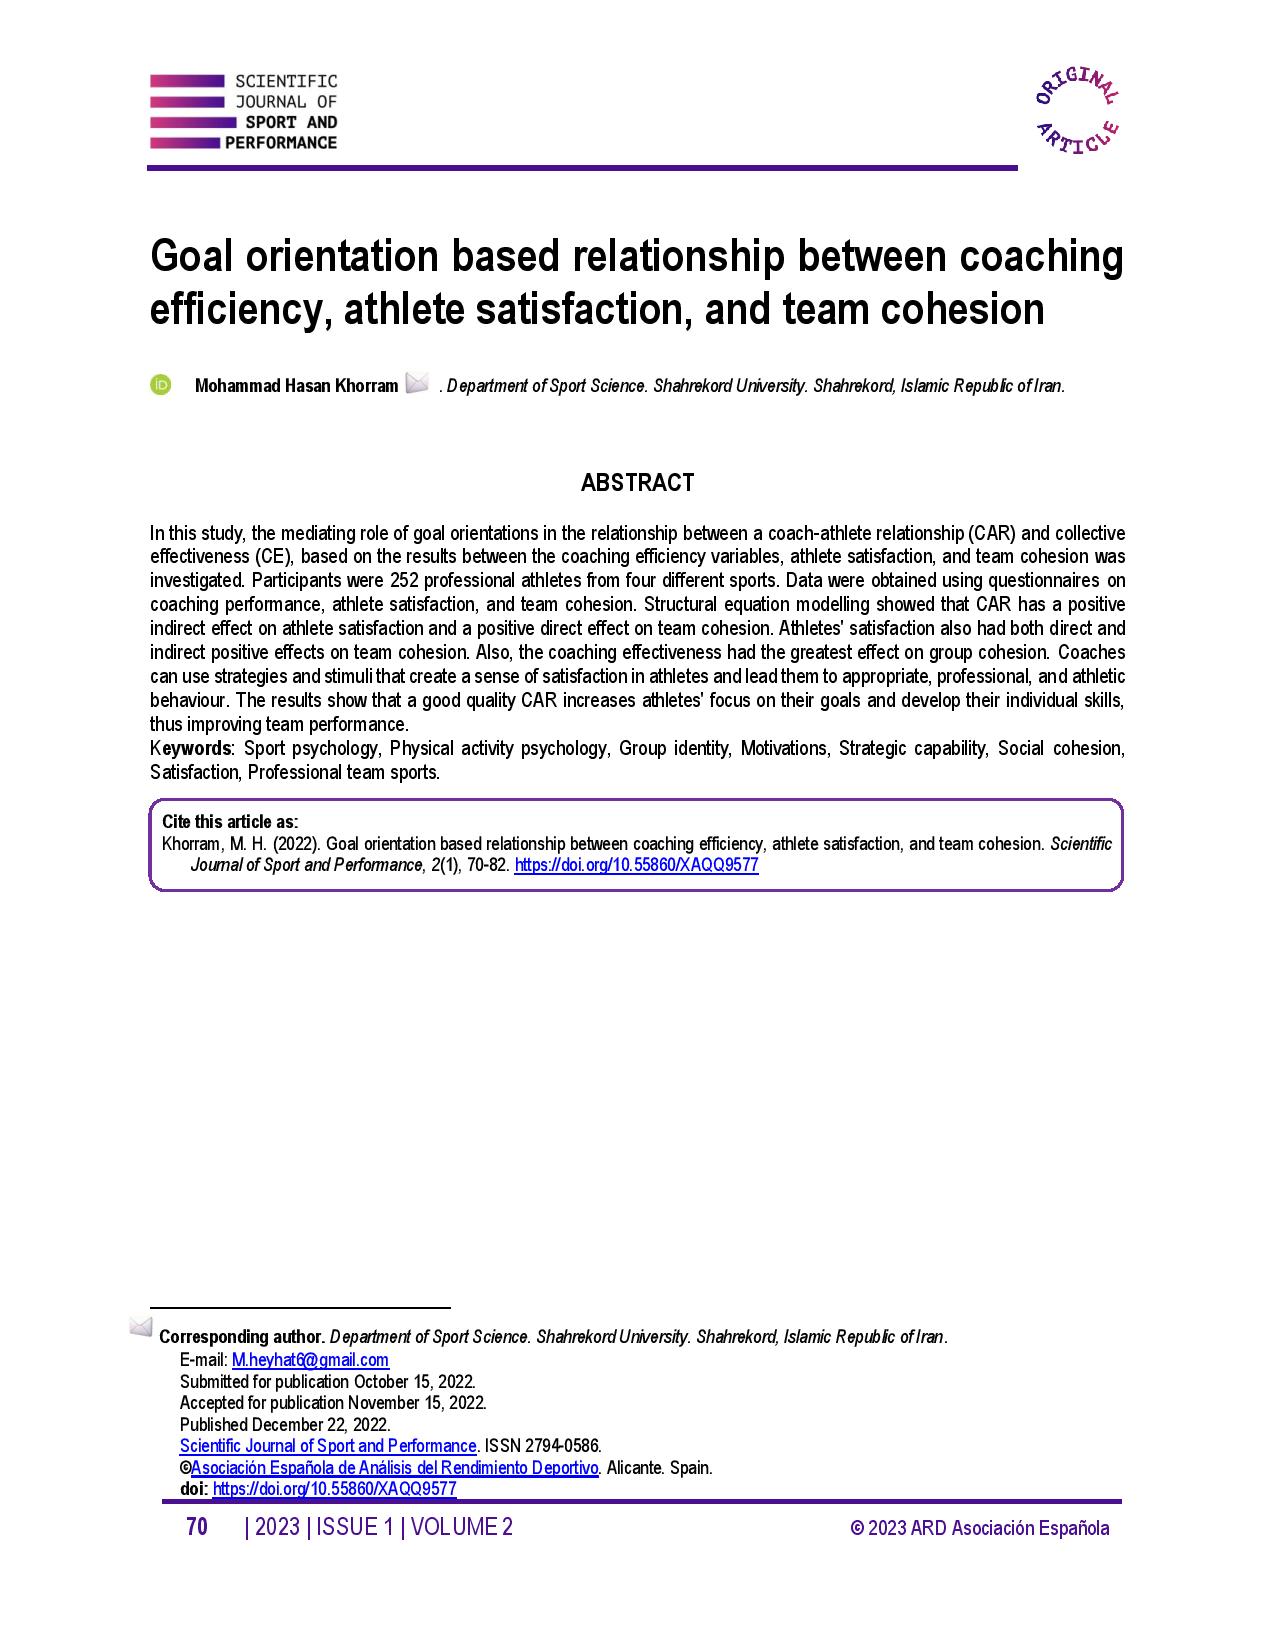 Goal orientation based relationship between coaching efficiency, athlete satisfaction, and team cohesion